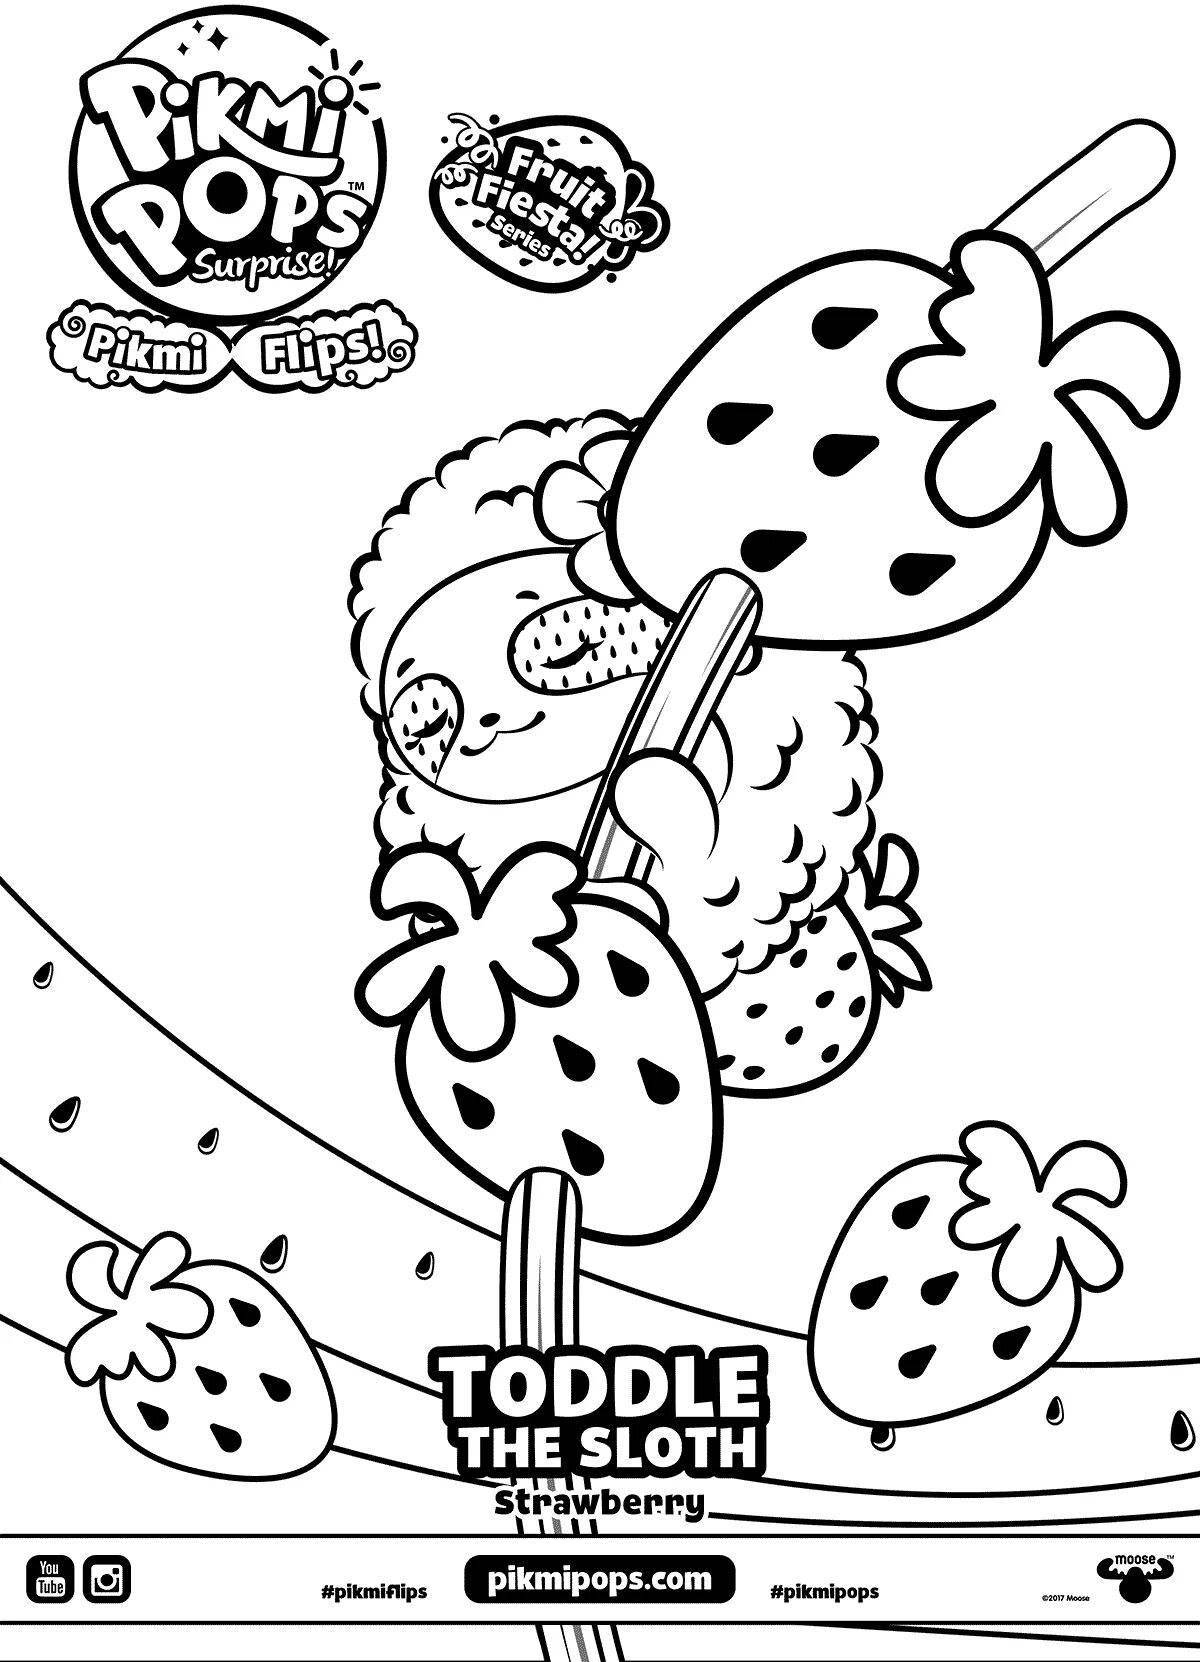 Vibrant pikmy pops coloring page